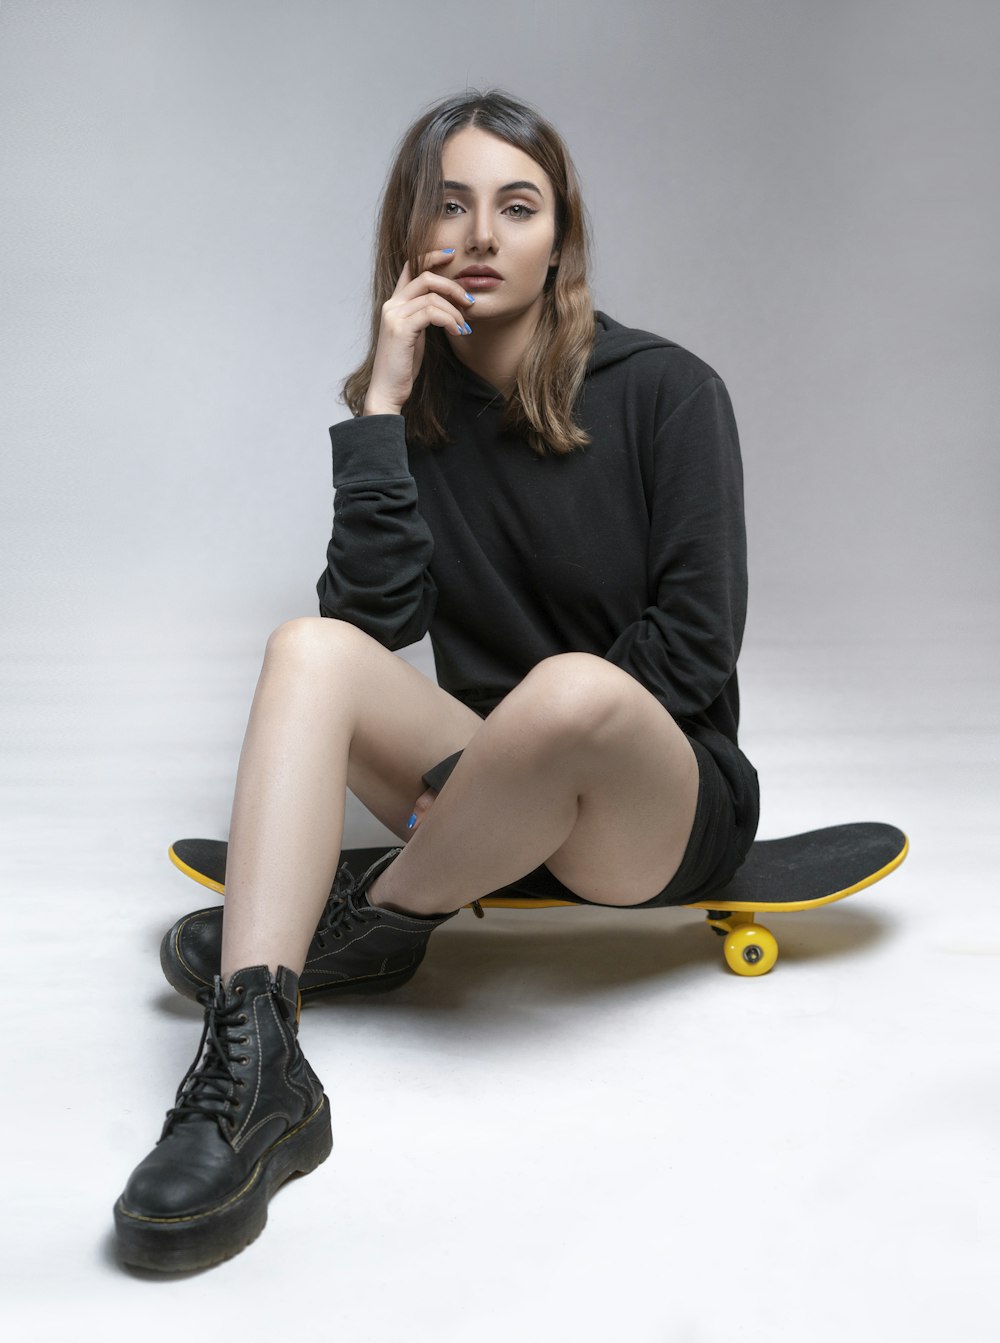 a woman sitting on top of a skateboard